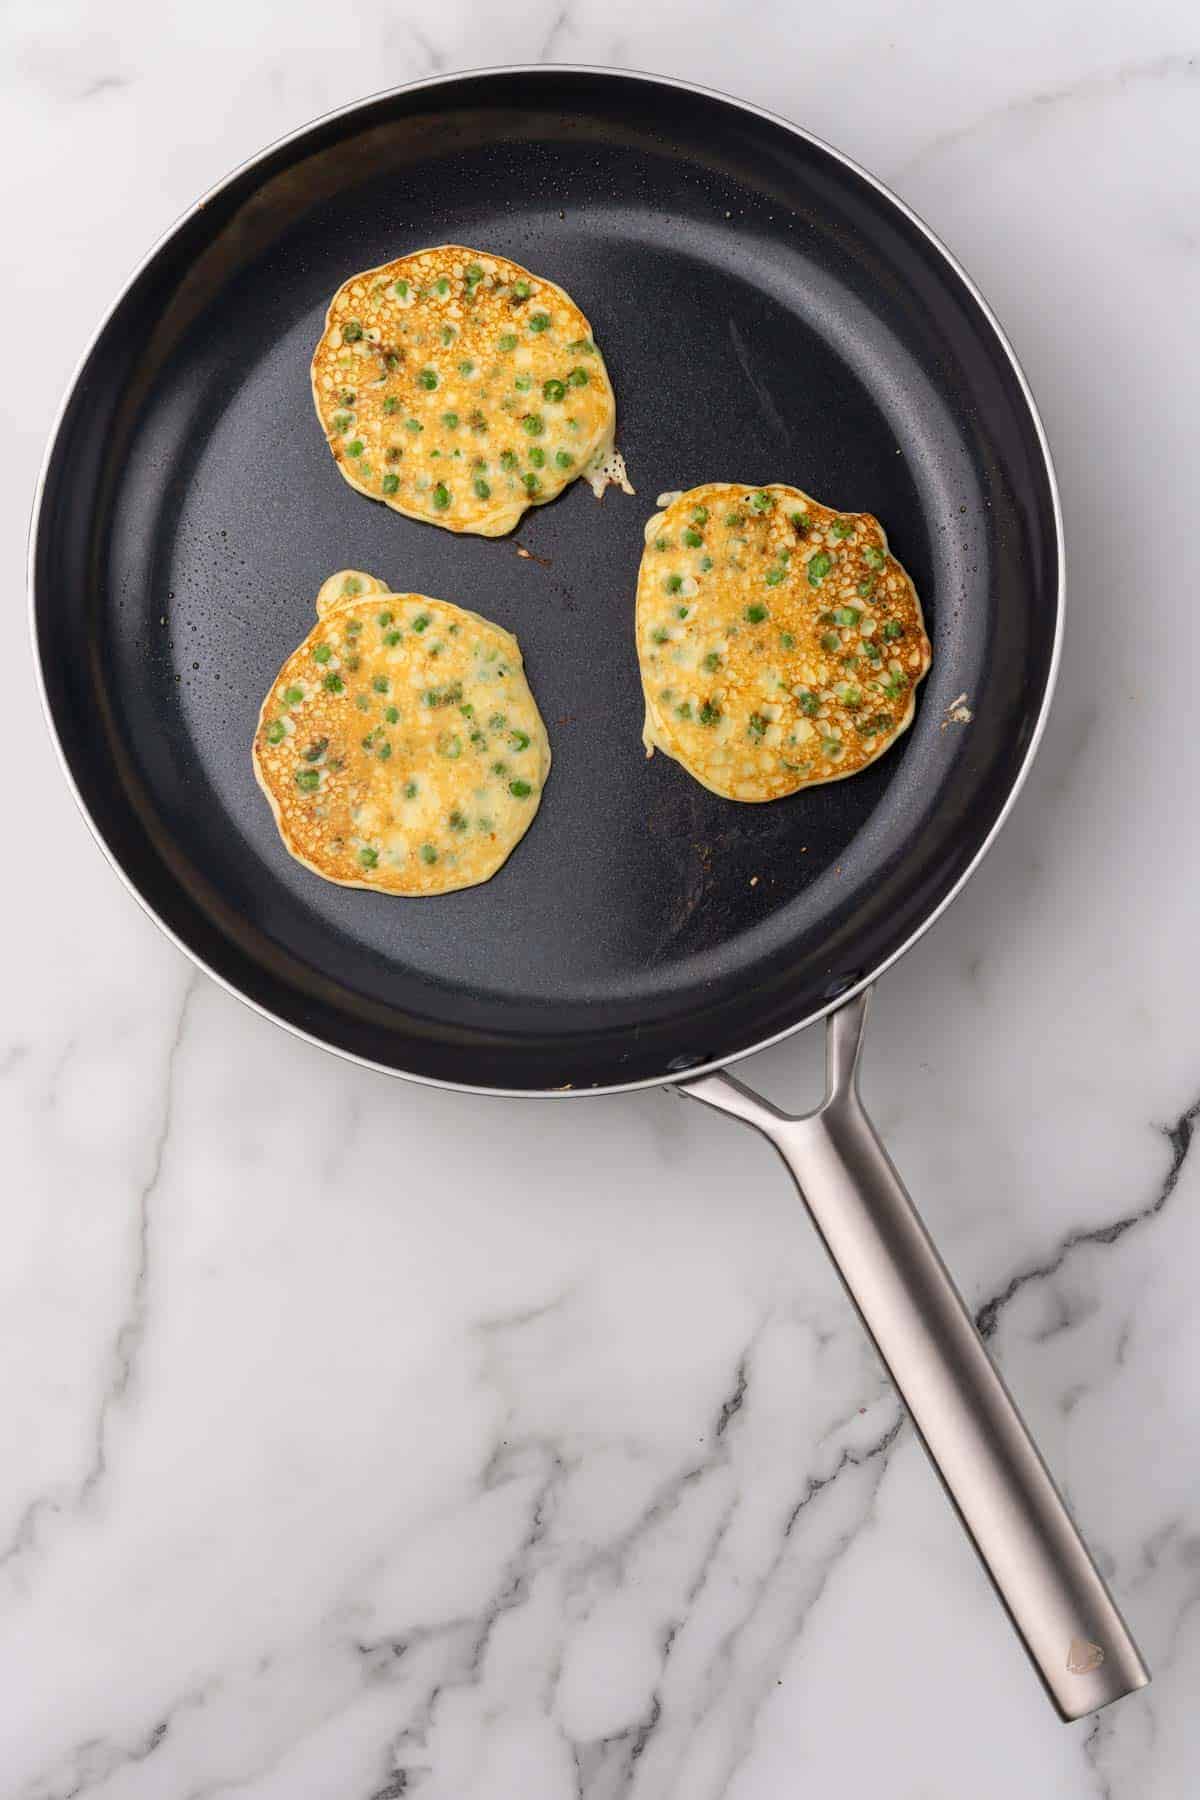 Three pancakes flipped in a black skillet with the golden-brown side facing up, as seen from above on a white marble surface